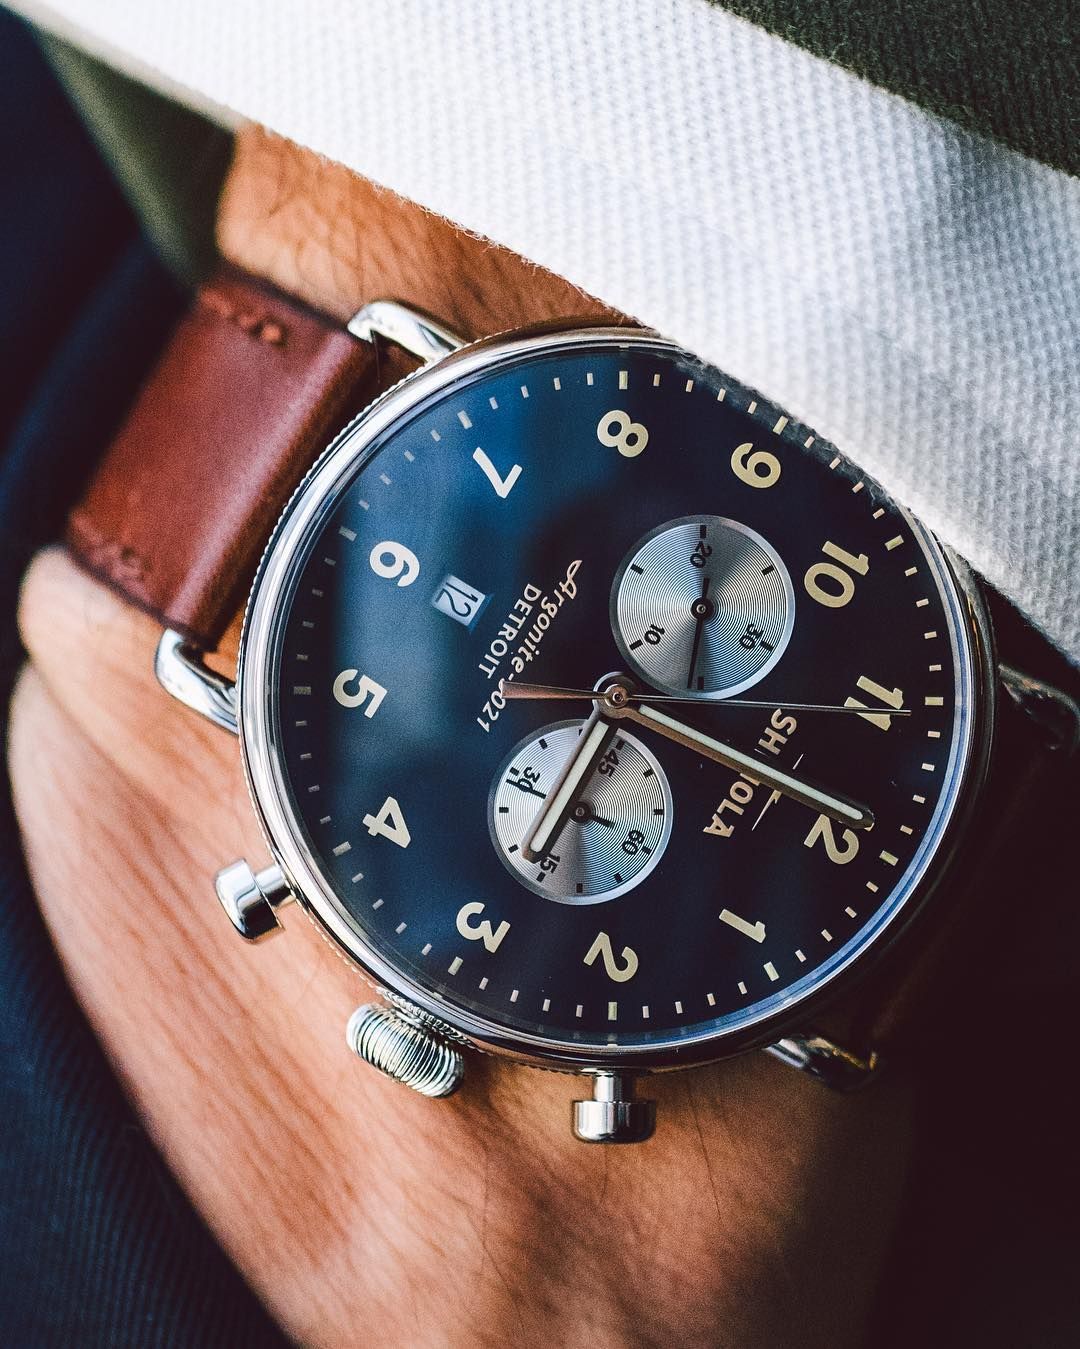 @Shinola’s newest watch is perfect for guys who want something eye-catching but no